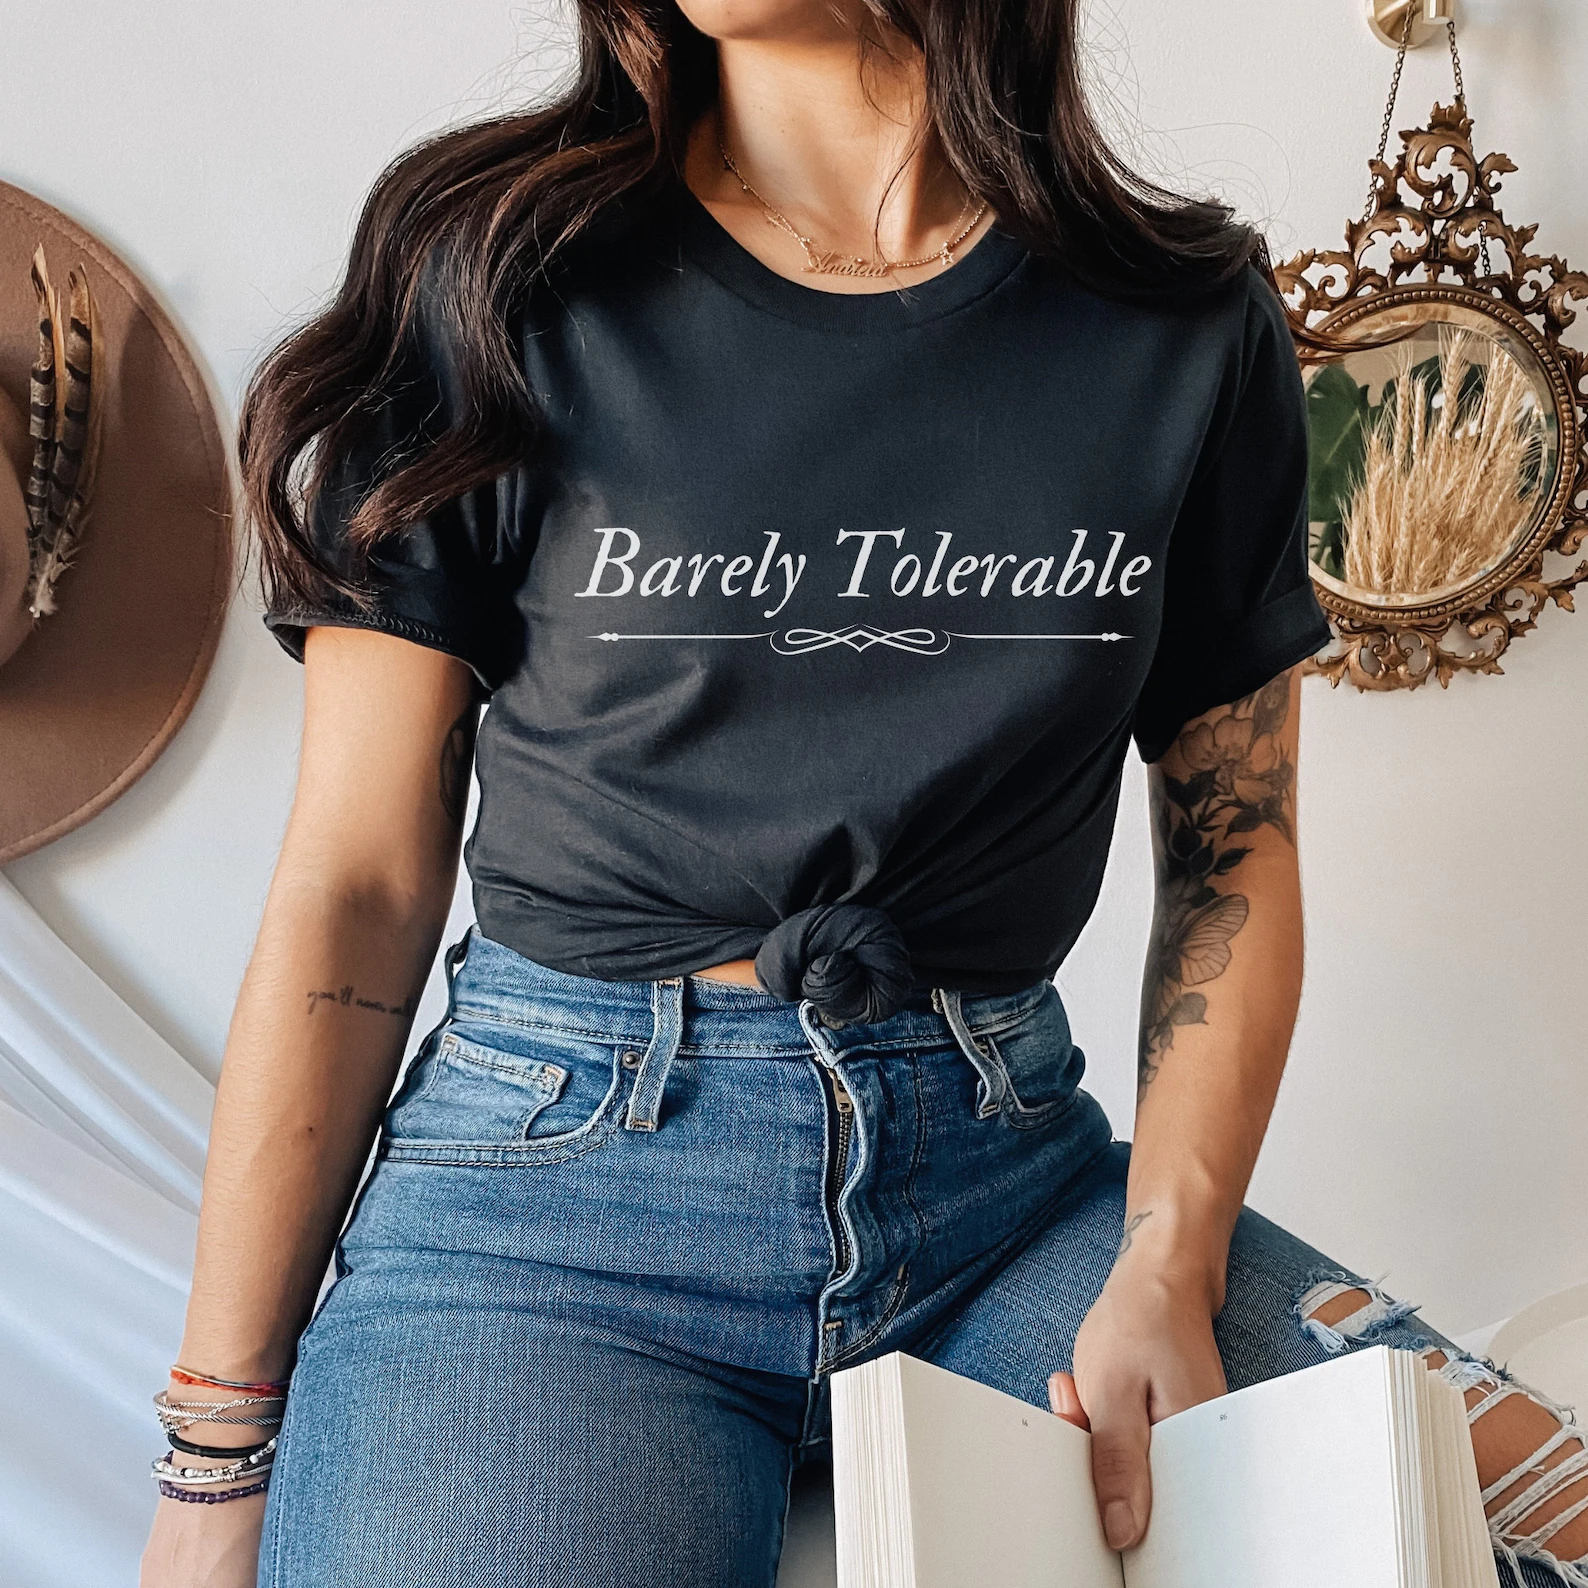 A black t-shirt with the words "Barely tolerable;e" written in fancy font